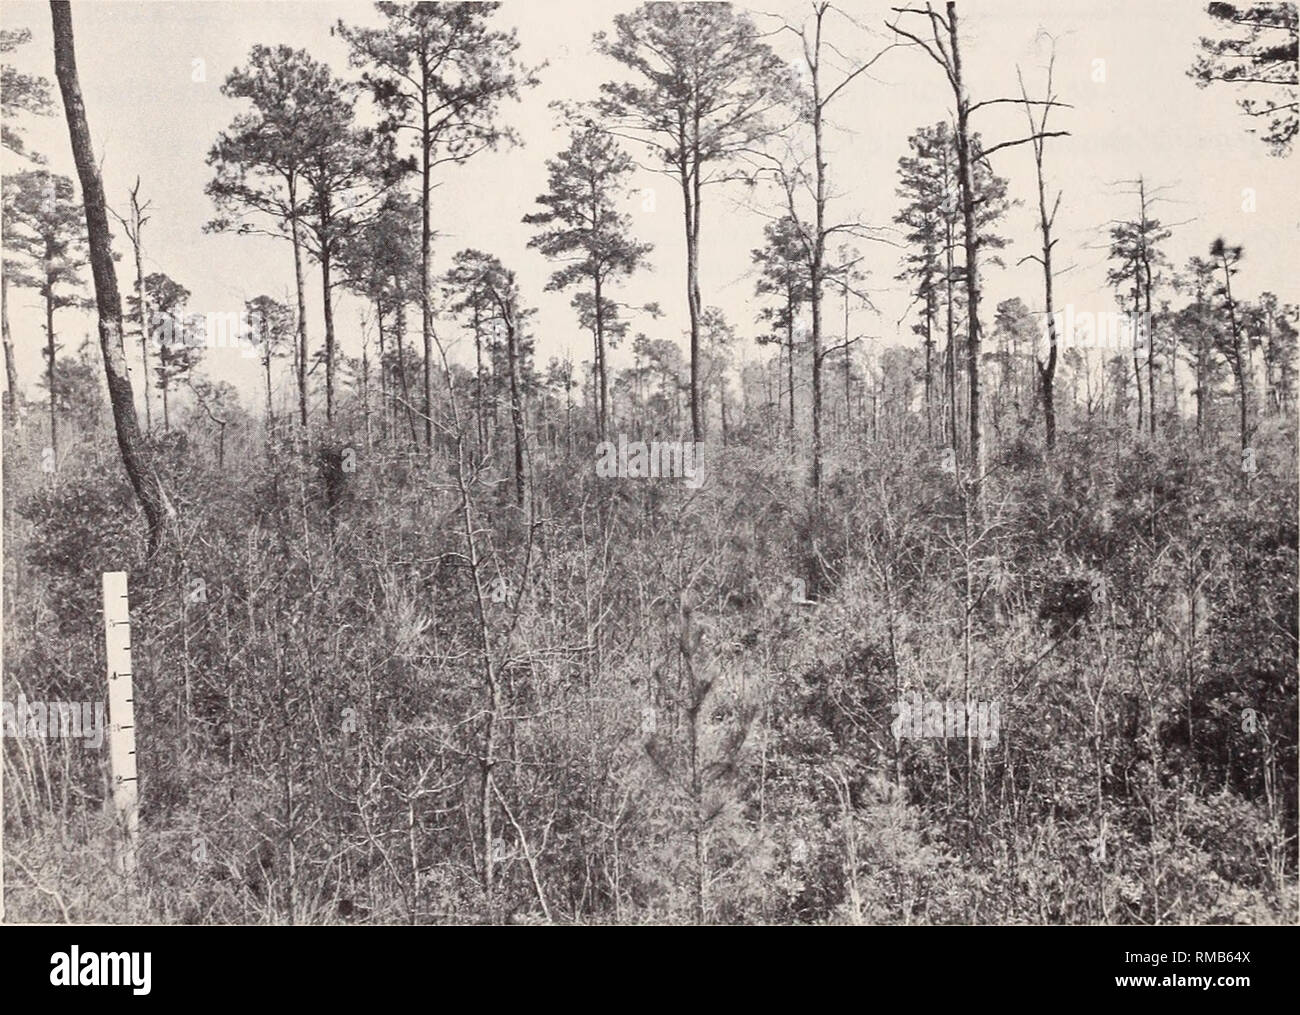 Annual report, 1954. Forests and forestry Southern States Periodicals;  Forests and forestry Research Southern States Periodicals. Figure  3.--Mature stand of loblolly pine-hardwoods on the Francis Marion National  Forest in Coastal Plain